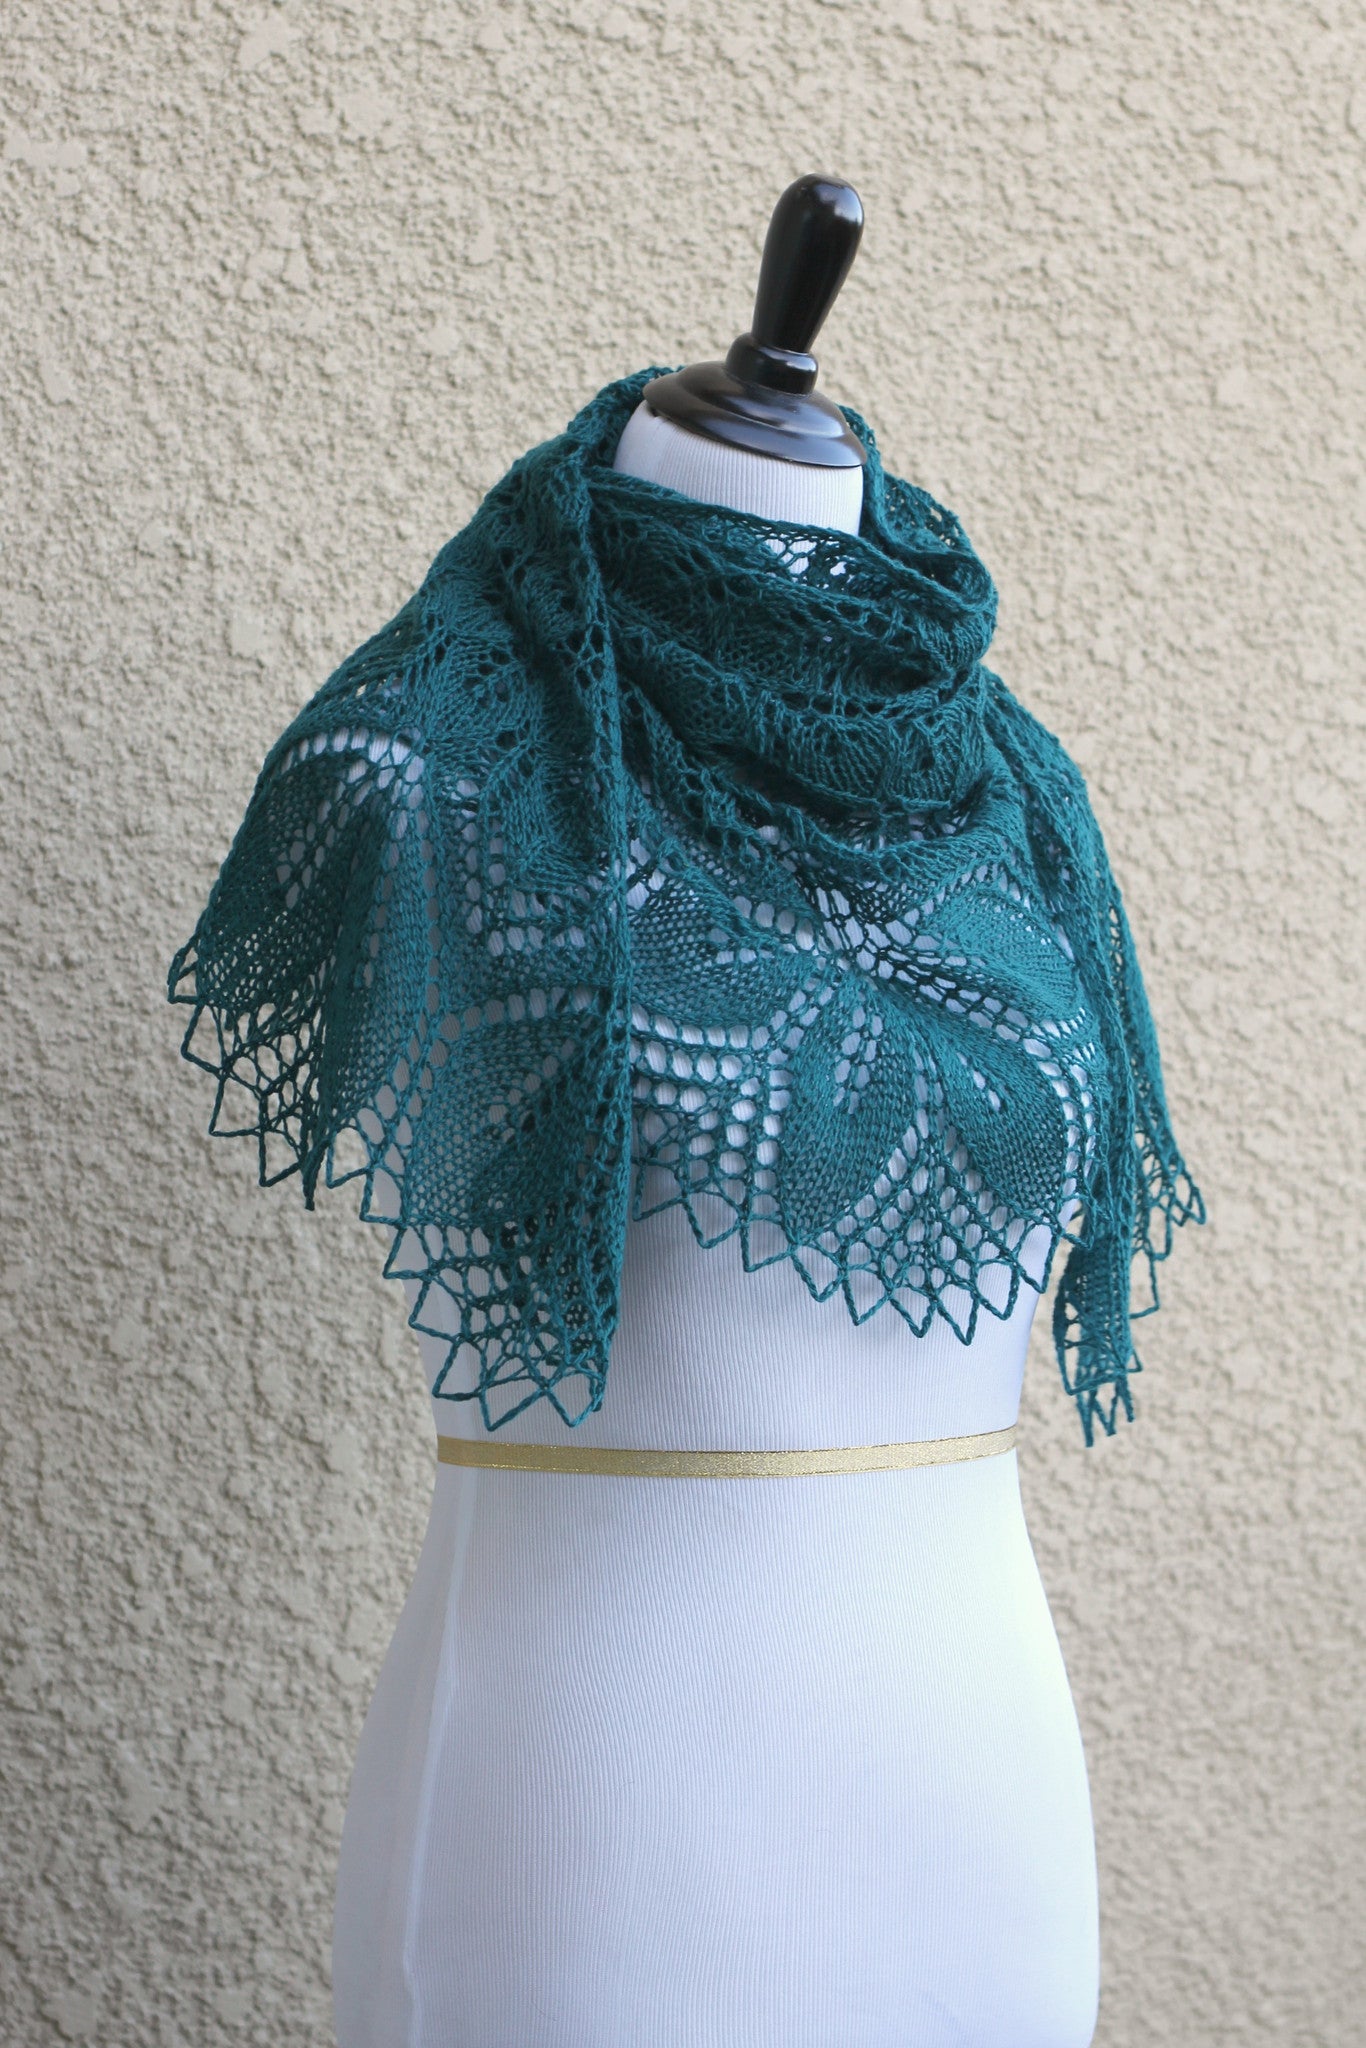 Lace shawl handknit in Teal color